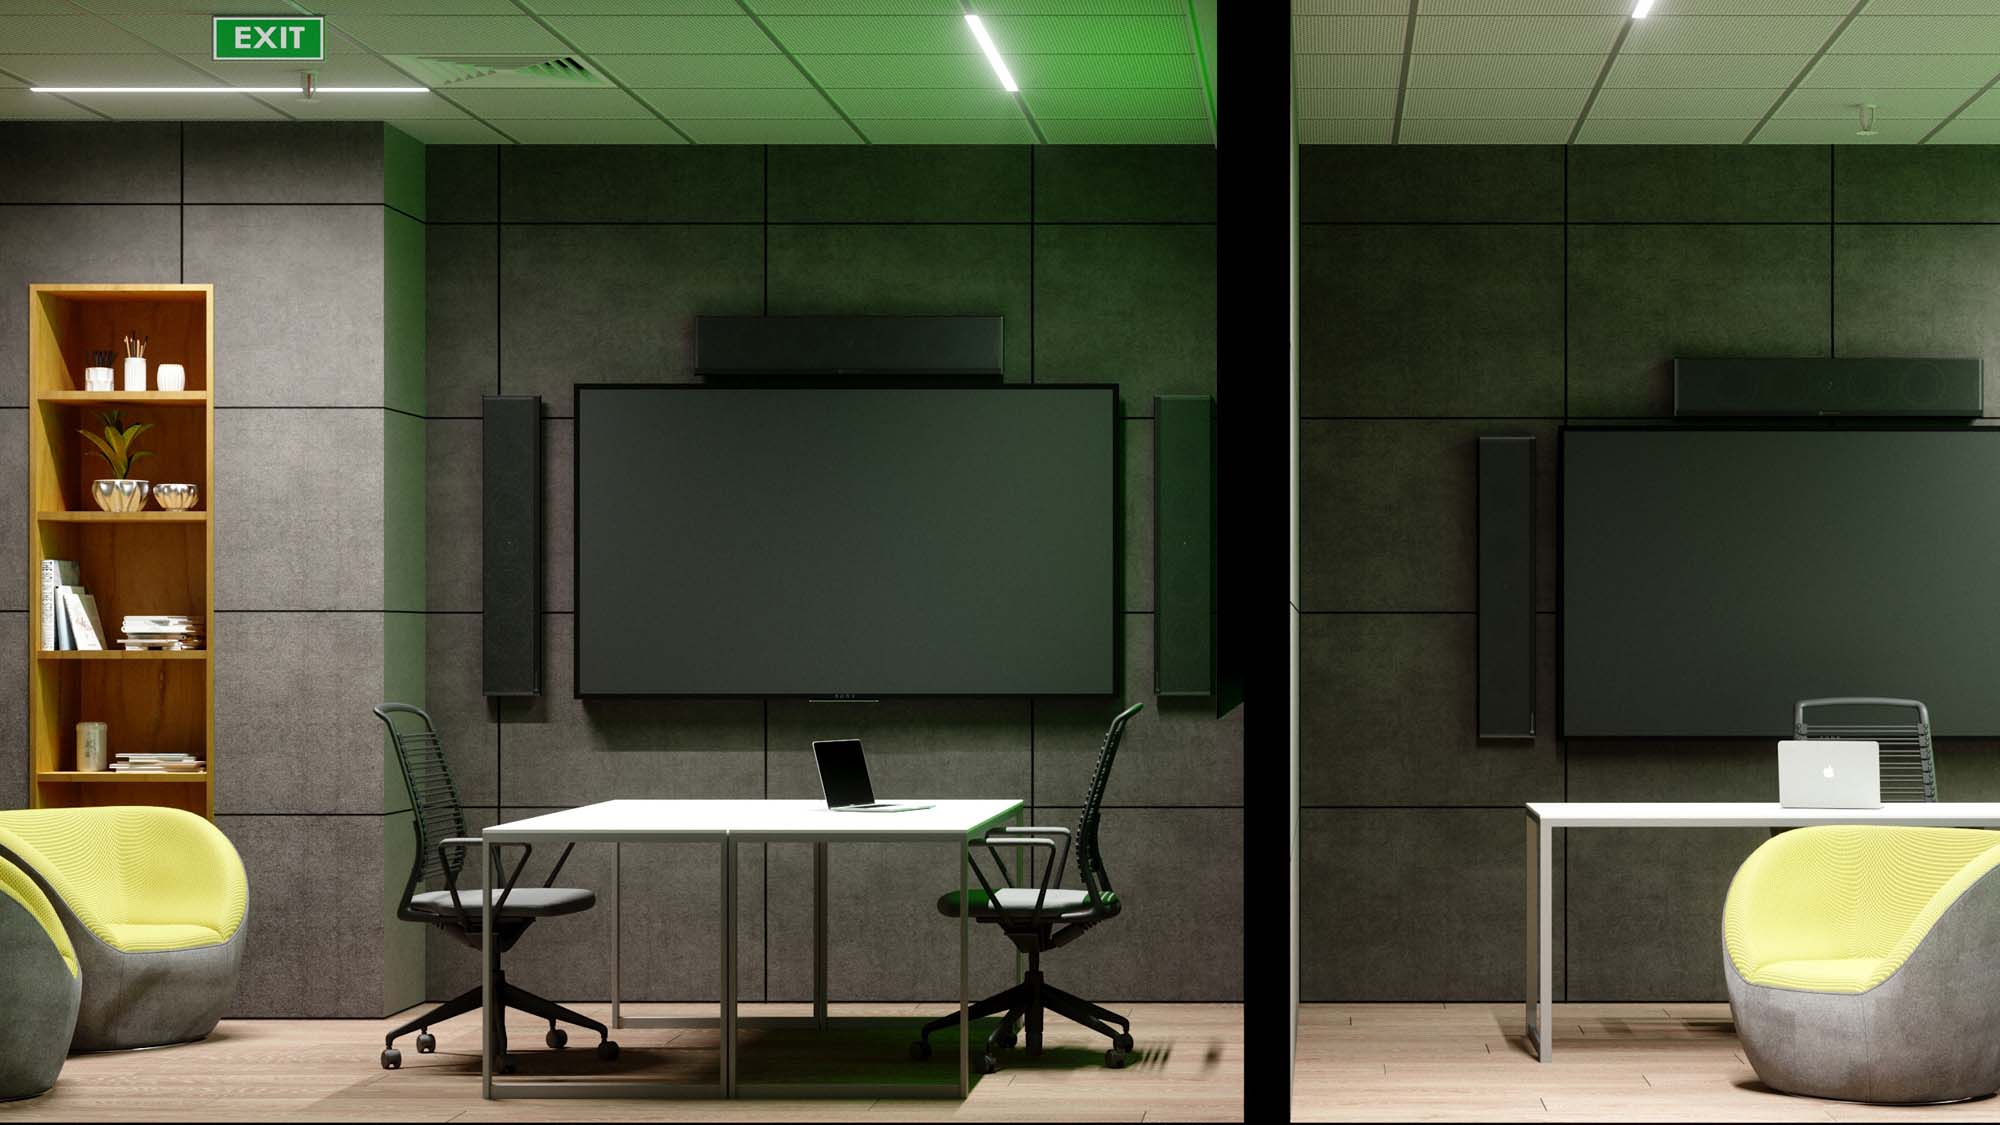 meeting rooms with green screens, tvs for presentations, seating, and desks